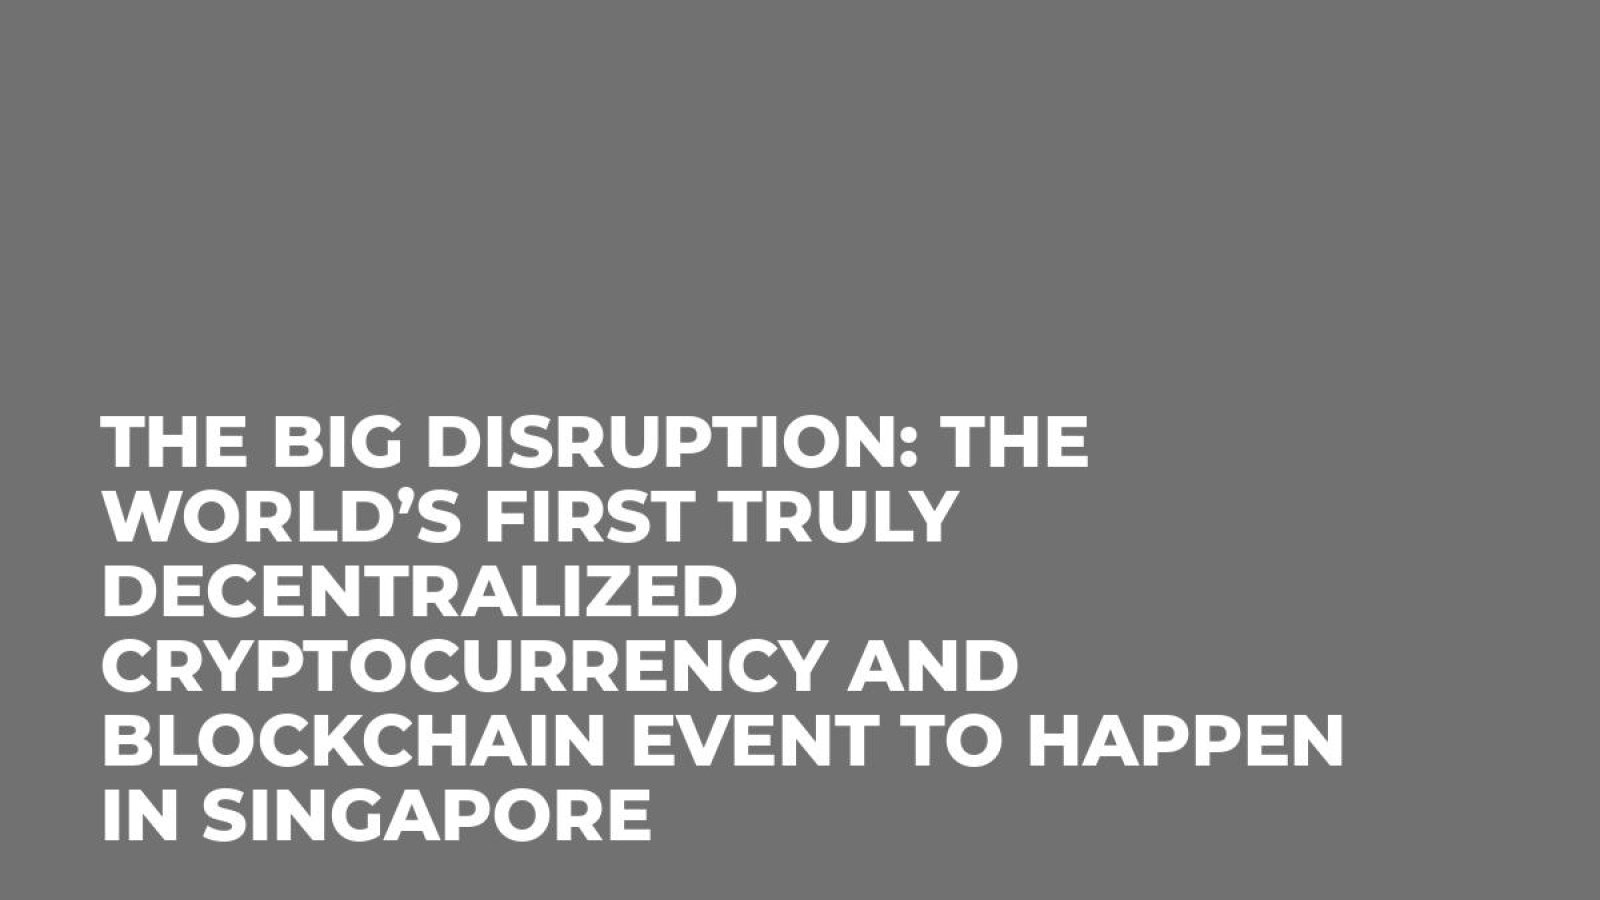 The Big Disruption: The world’s first truly decentralized cryptocurrency and blockchain event to happen in Singapore